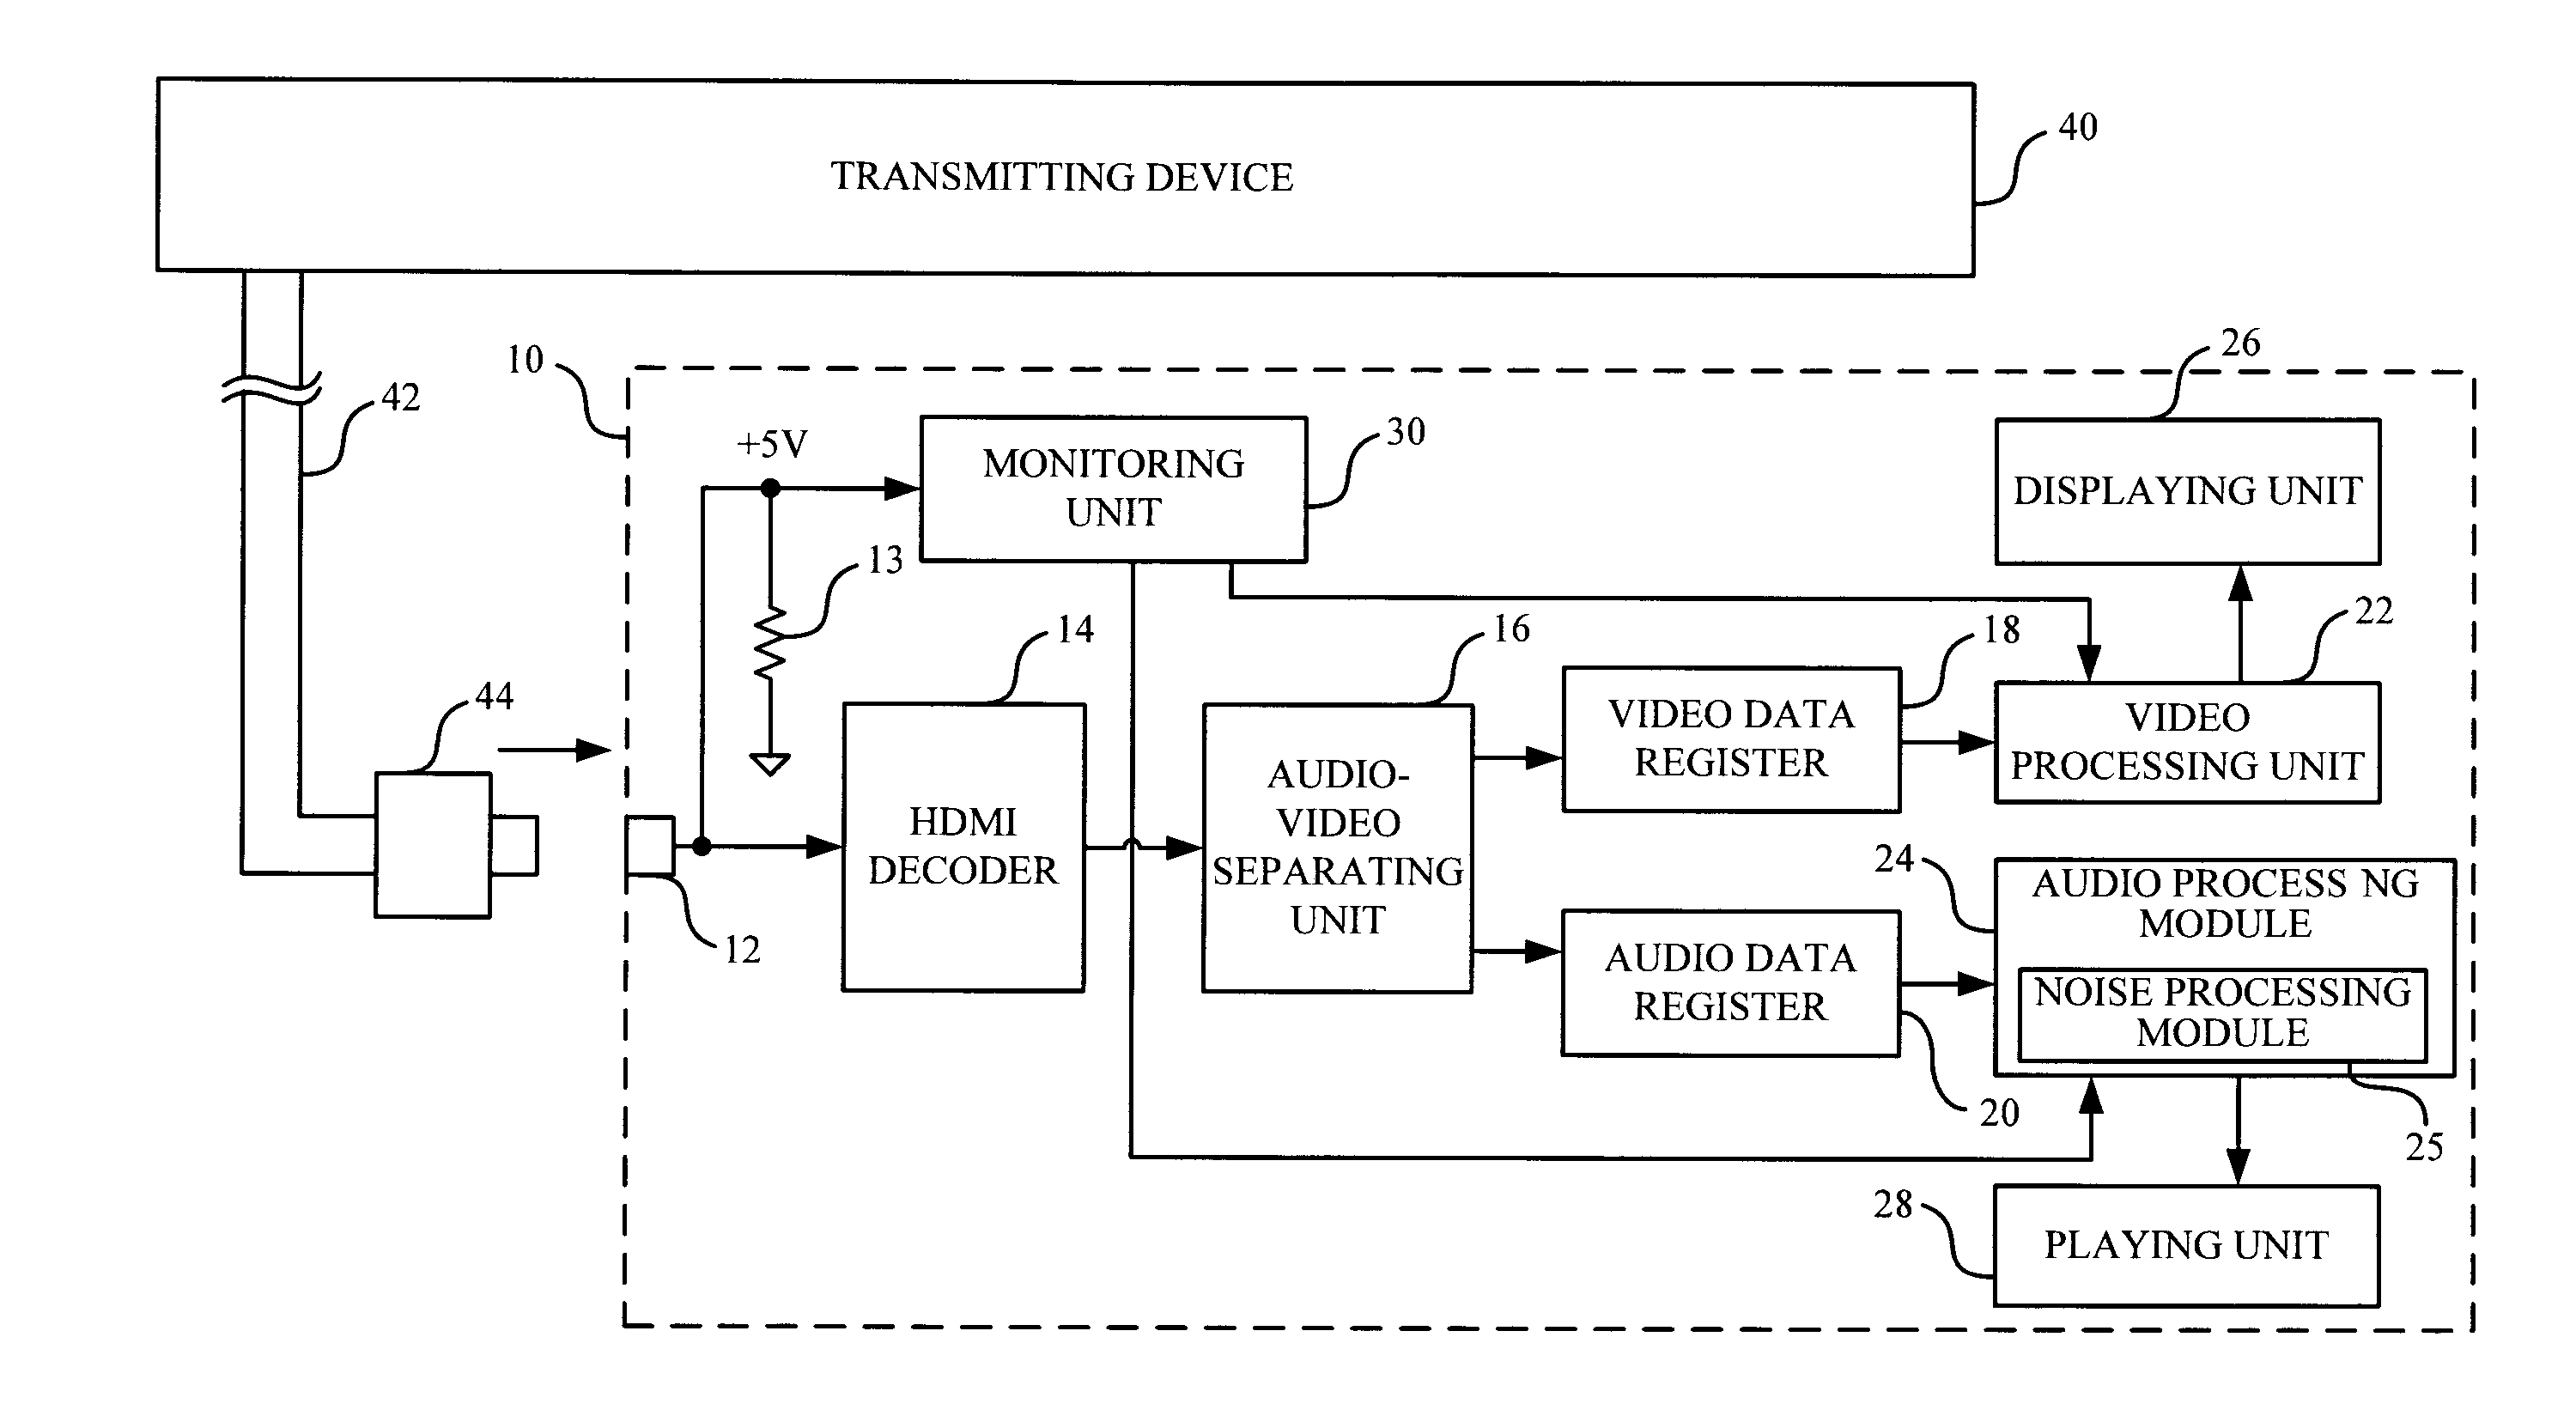 Receiving device for audio-video system